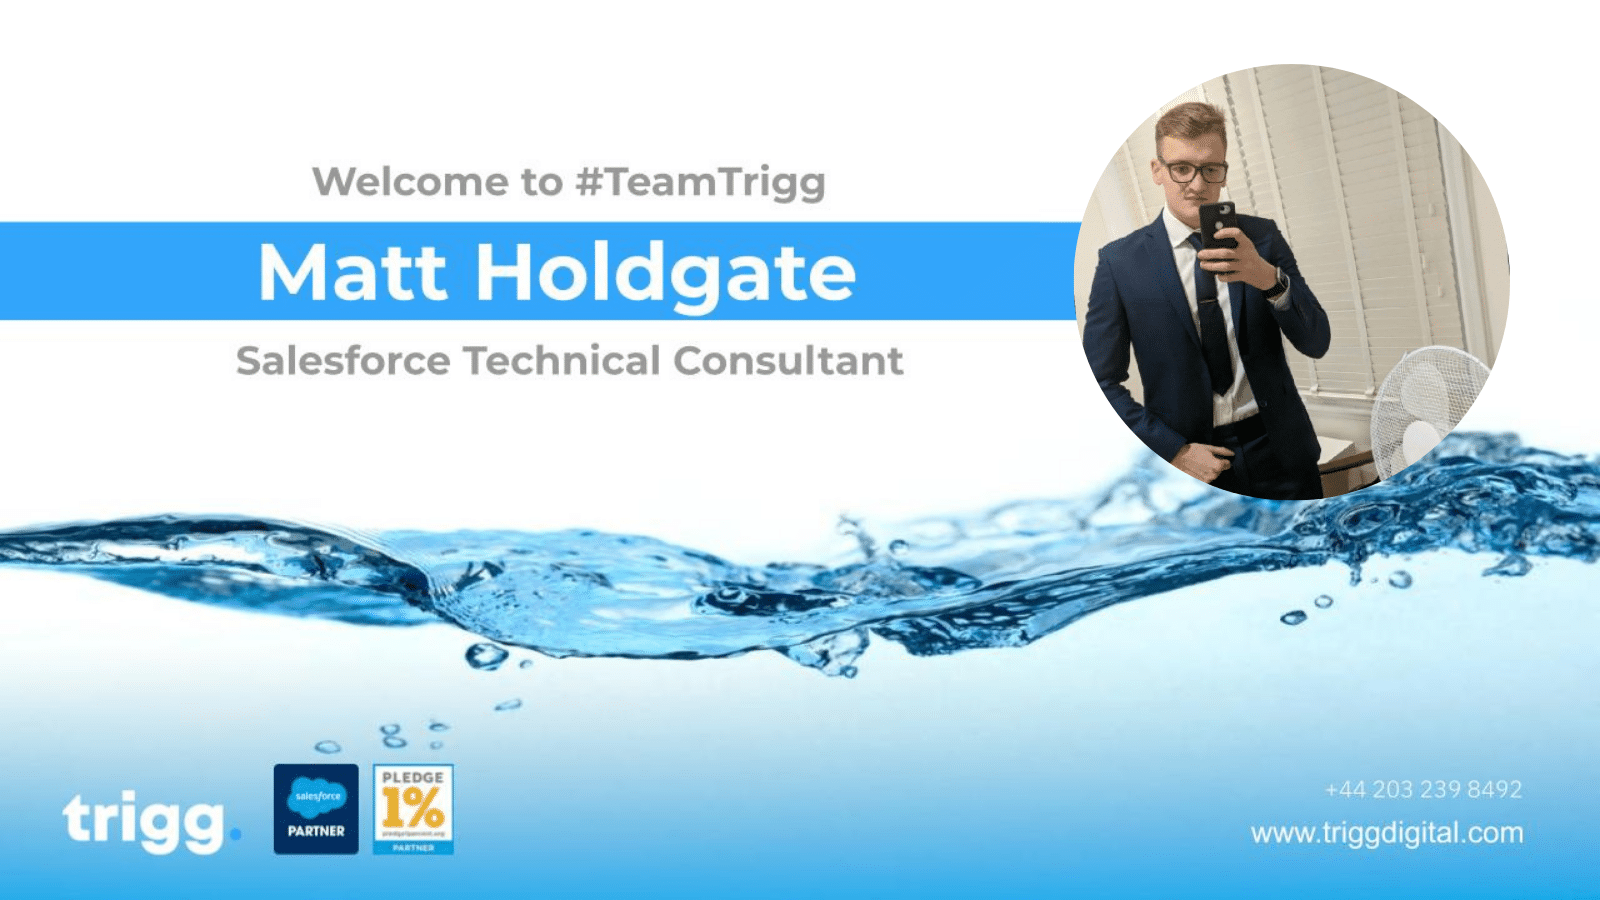 Welcome to the team - Matt Holdgate